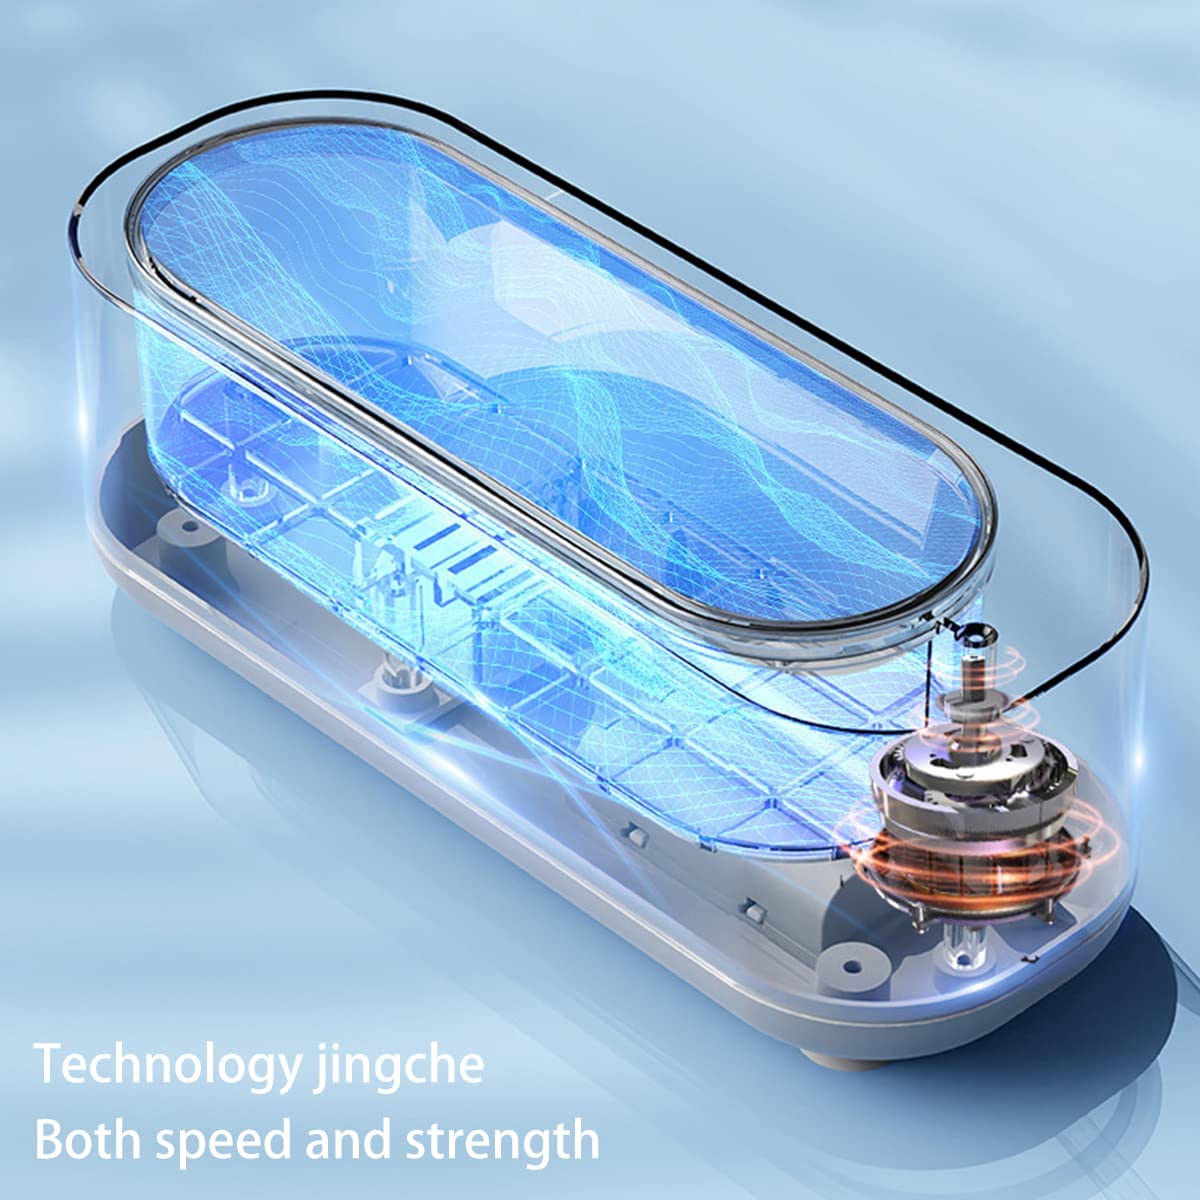 Portable Ultrasonic Cleaner, 300ML Professional Ultrasonic Cleaning Machine Ultrasonic Jewelry Cleaner for Glasses Jewelry Rings Necklaces Coin Watches Dentures Wintory